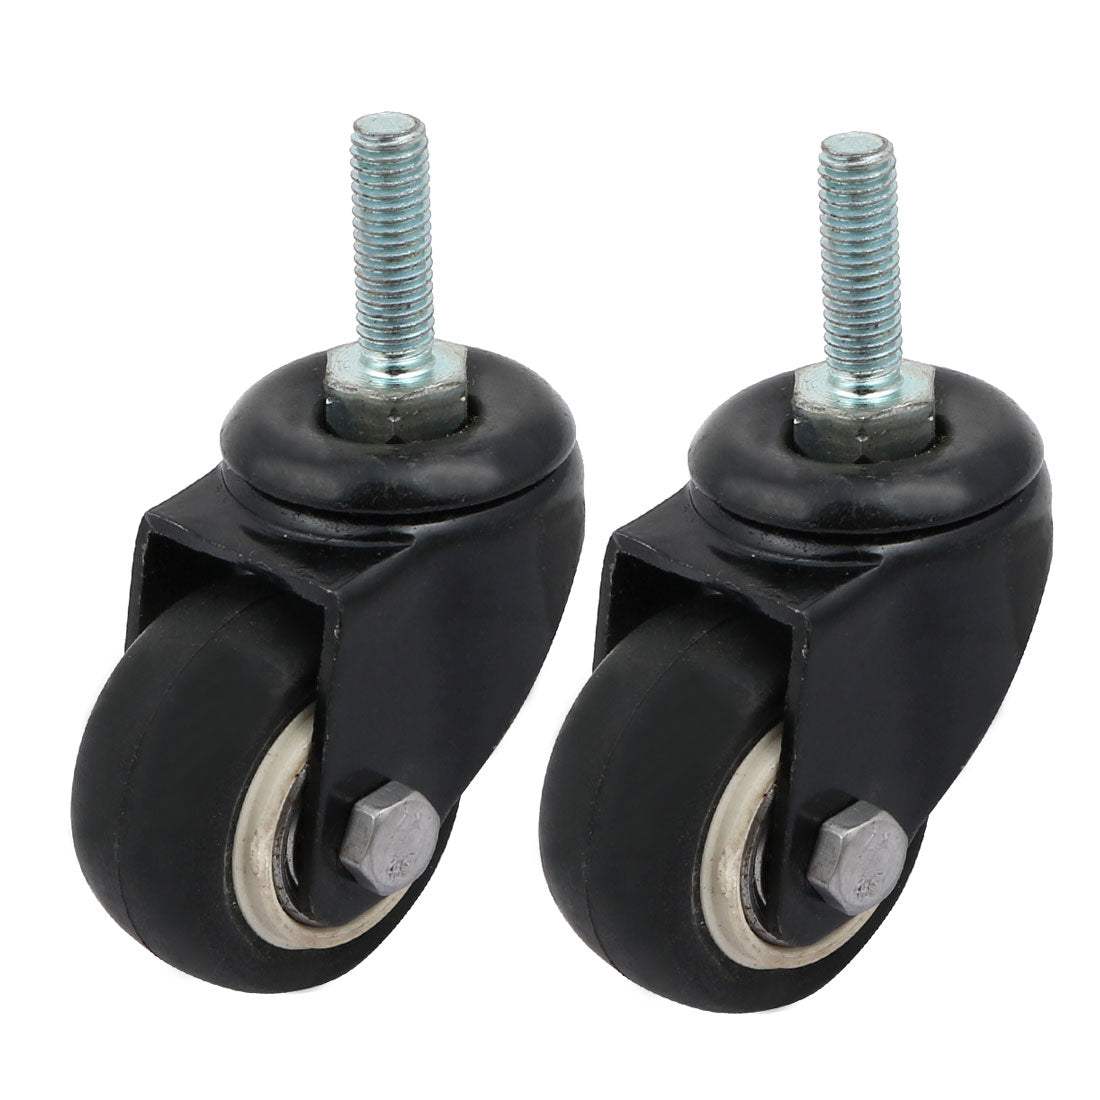 uxcell Uxcell 1.5-inch Dia M8 Threaded Stem Swivel Caster Wheel 2pcs